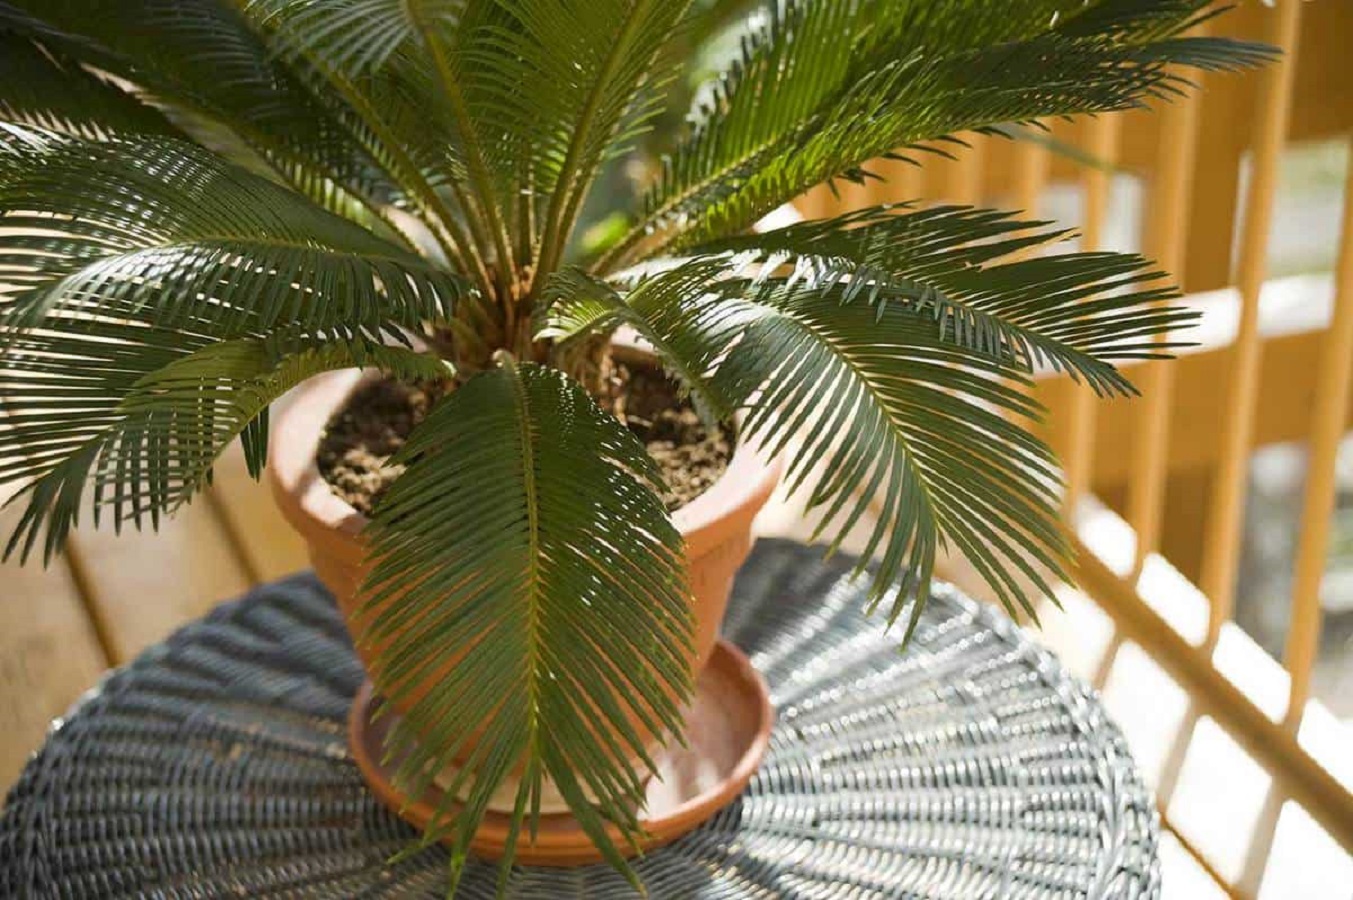 Exotic Sago Palm - Care, Toxicity and Most Common Issues